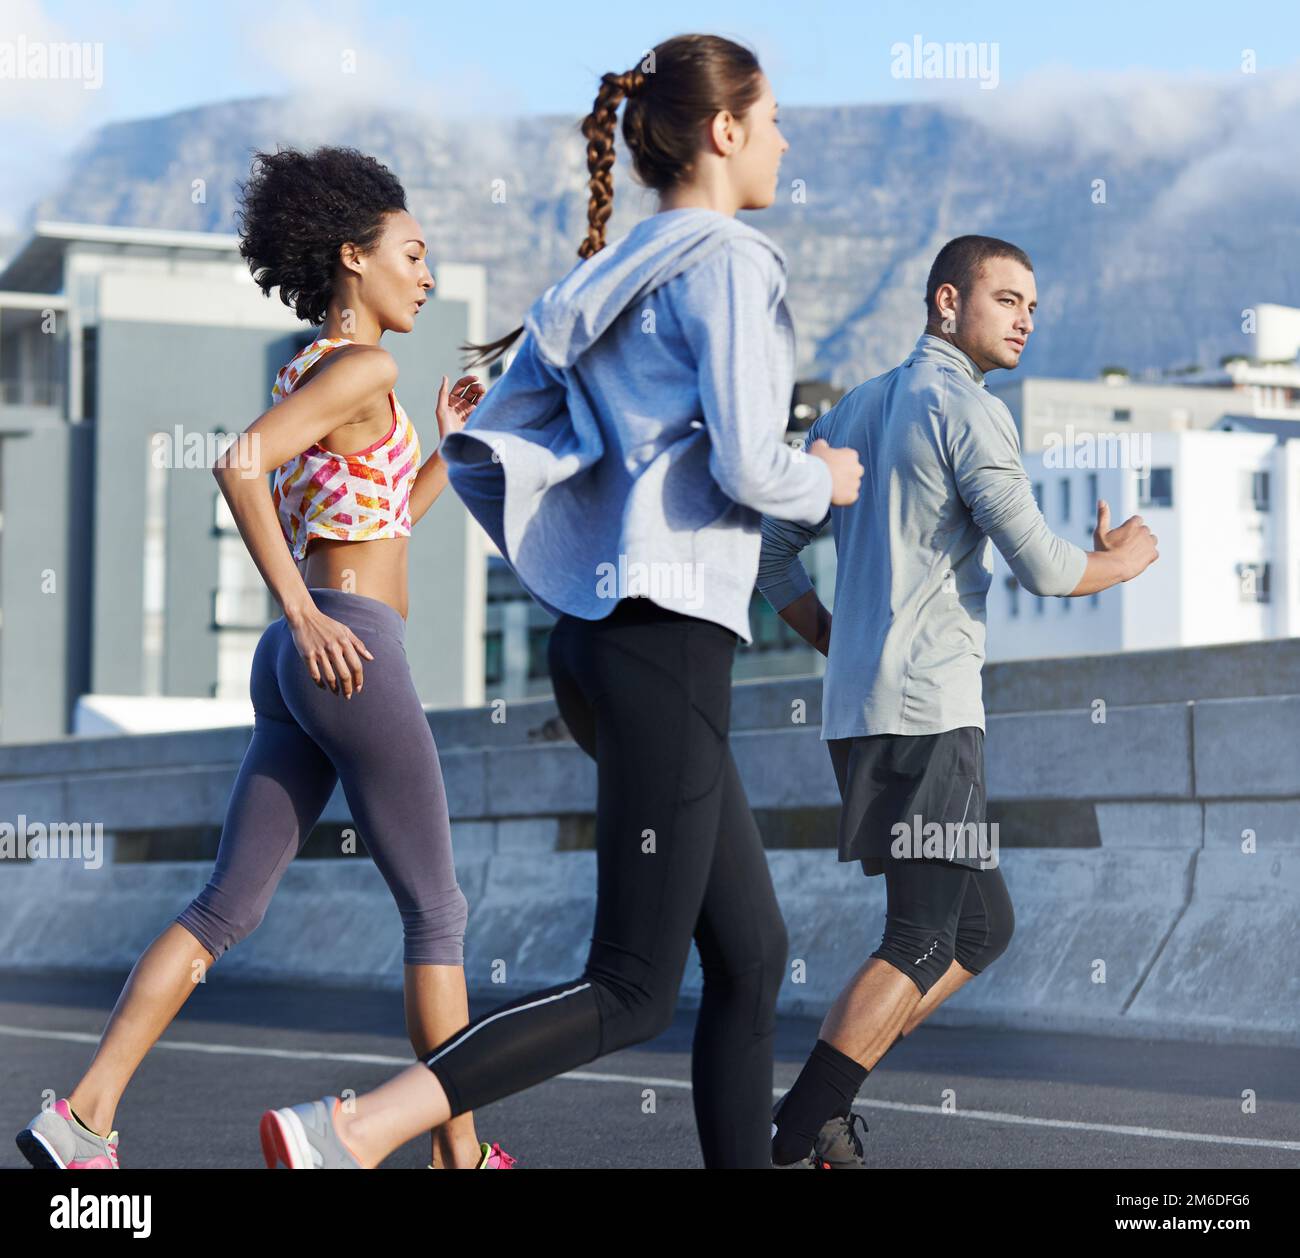 The jogging pack. a group of friends jogging together through the city. Stock Photo